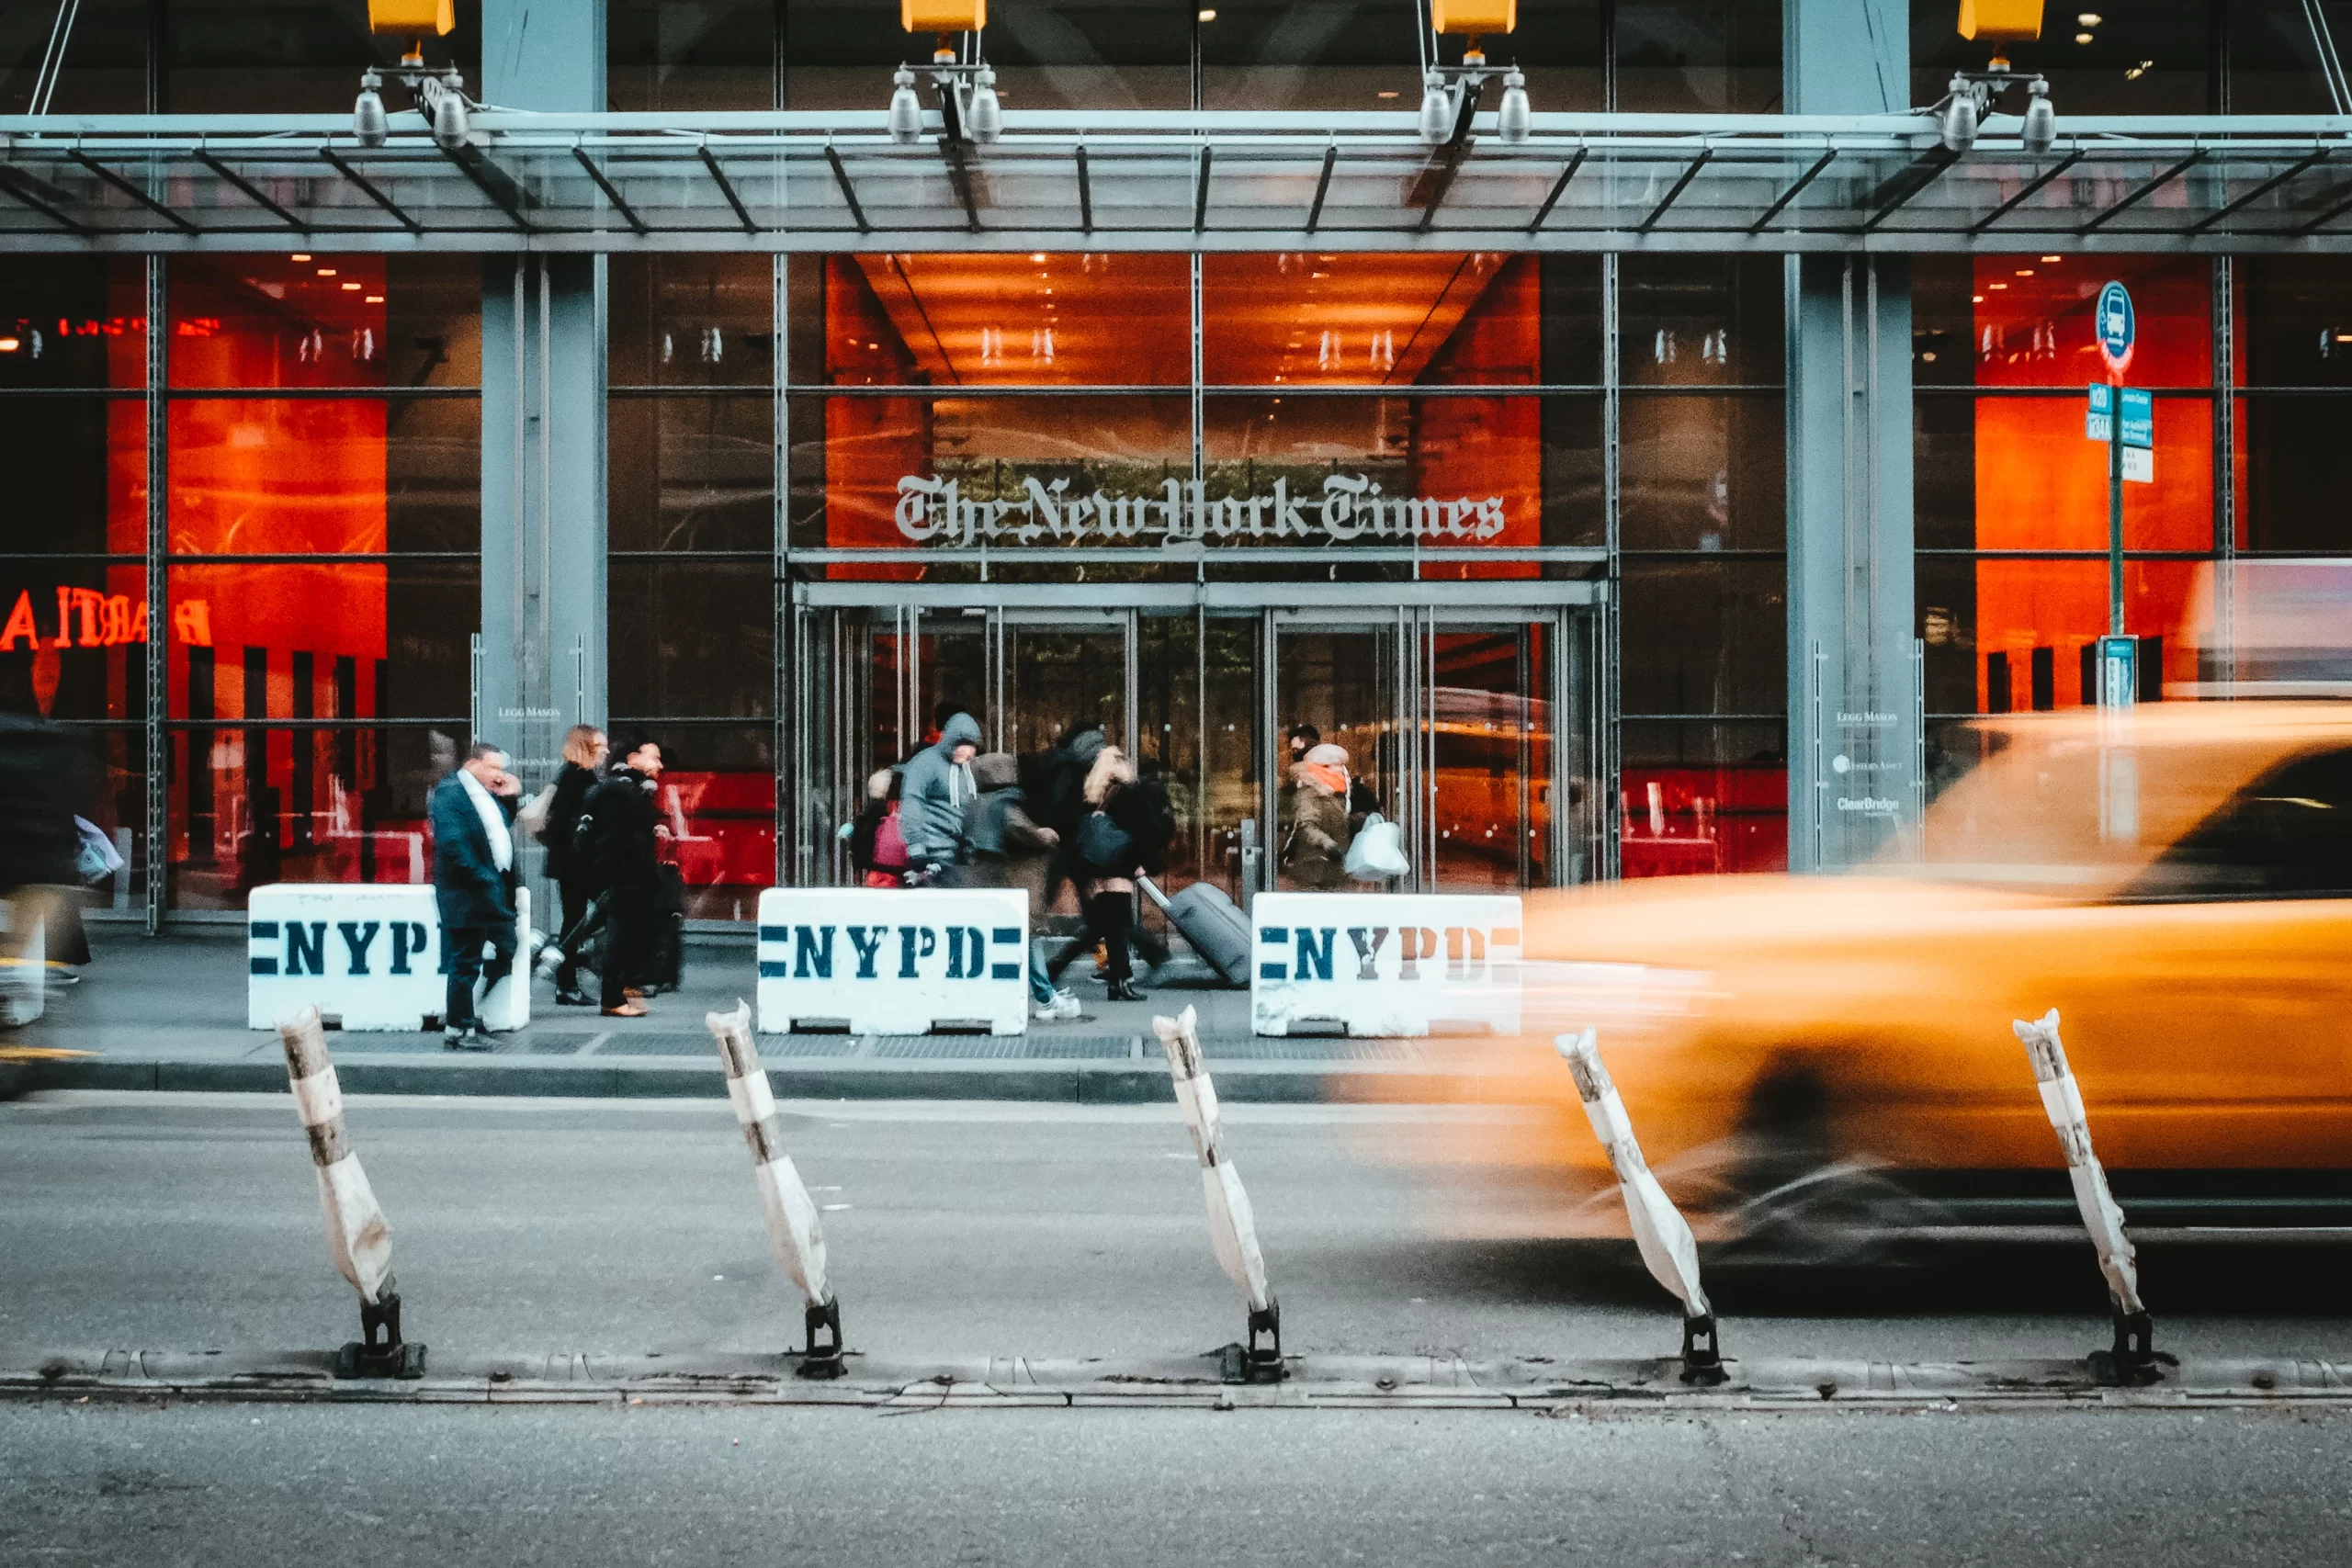 New York Times Building, New York, États-Unis Published on March 5, 2019 Free to use under the Unsplash License The iconic New York Times Building